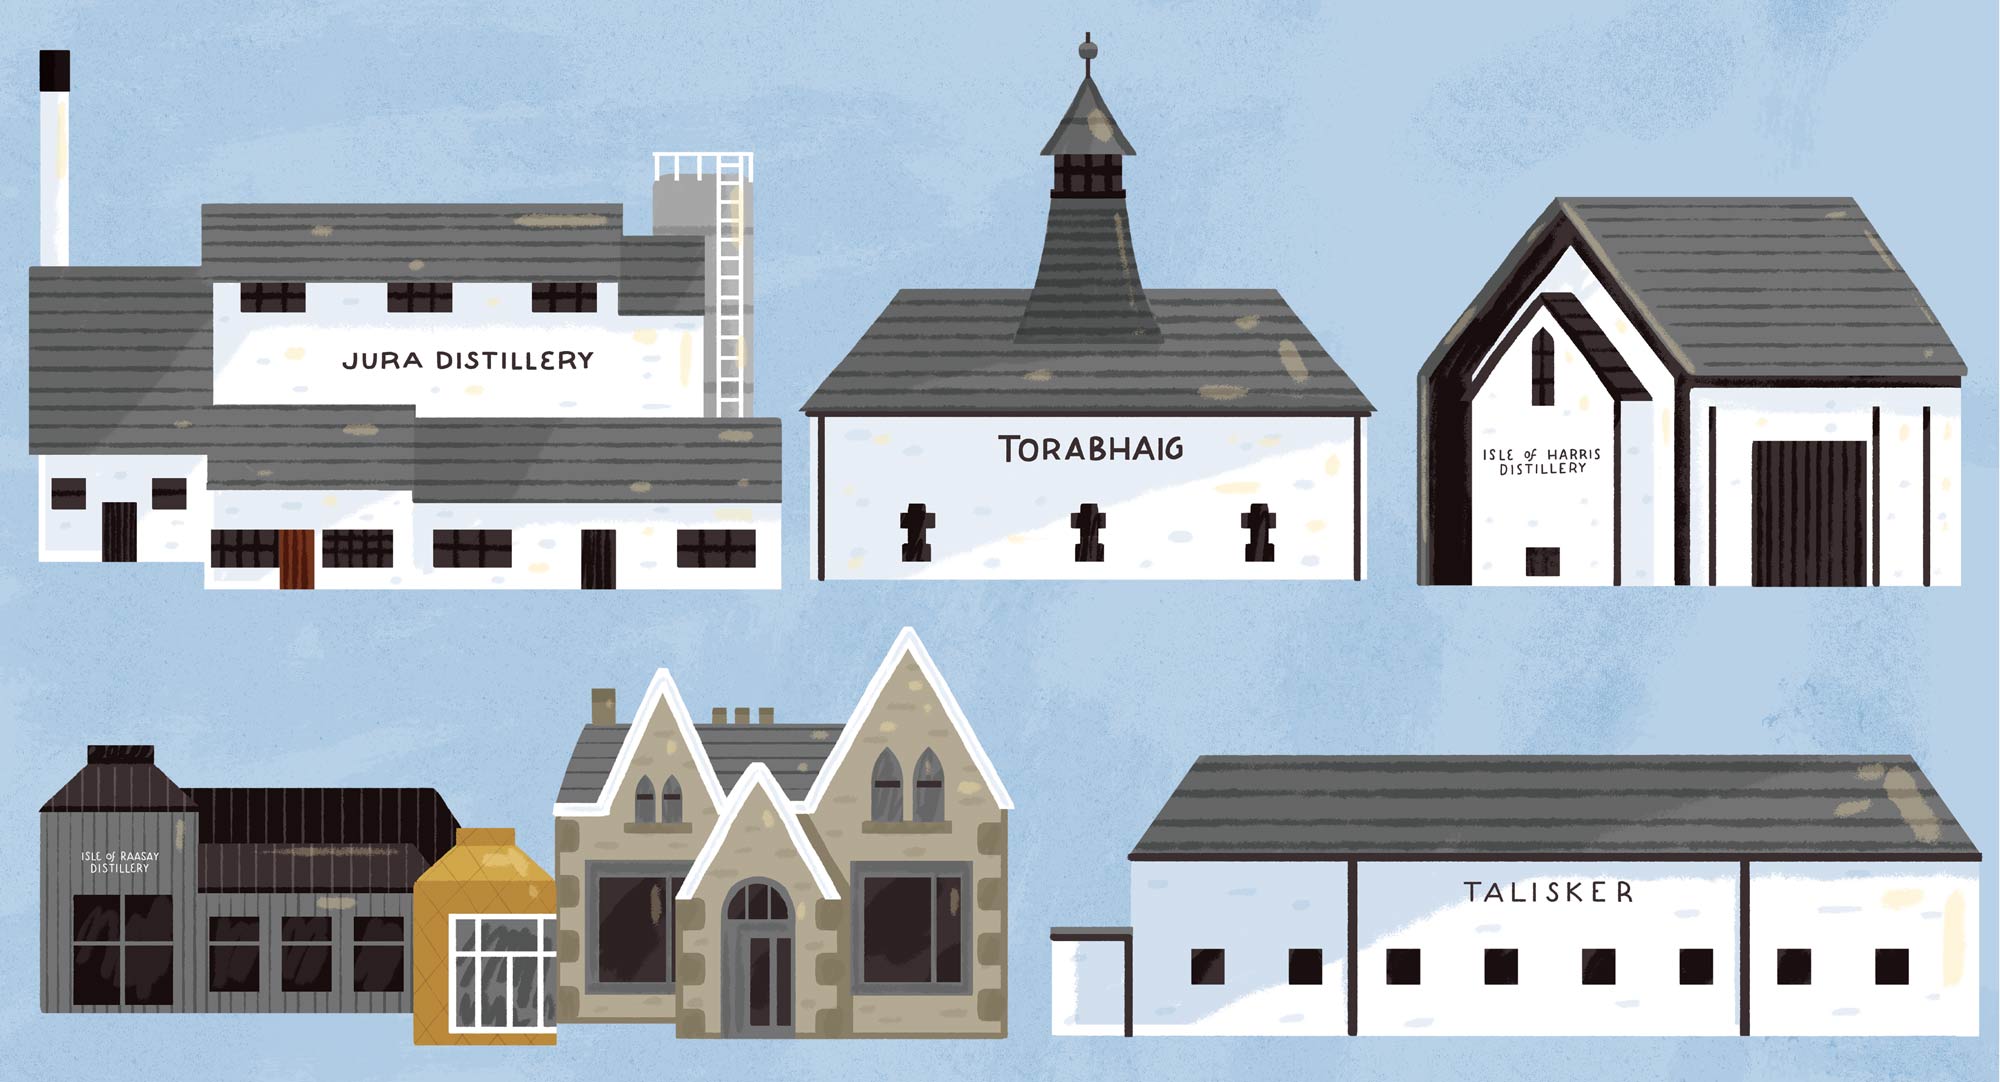 Illustrated spot illustrations from a map of Whiskey Distilleries of the Scottish Western Isles by Elly Jahnz